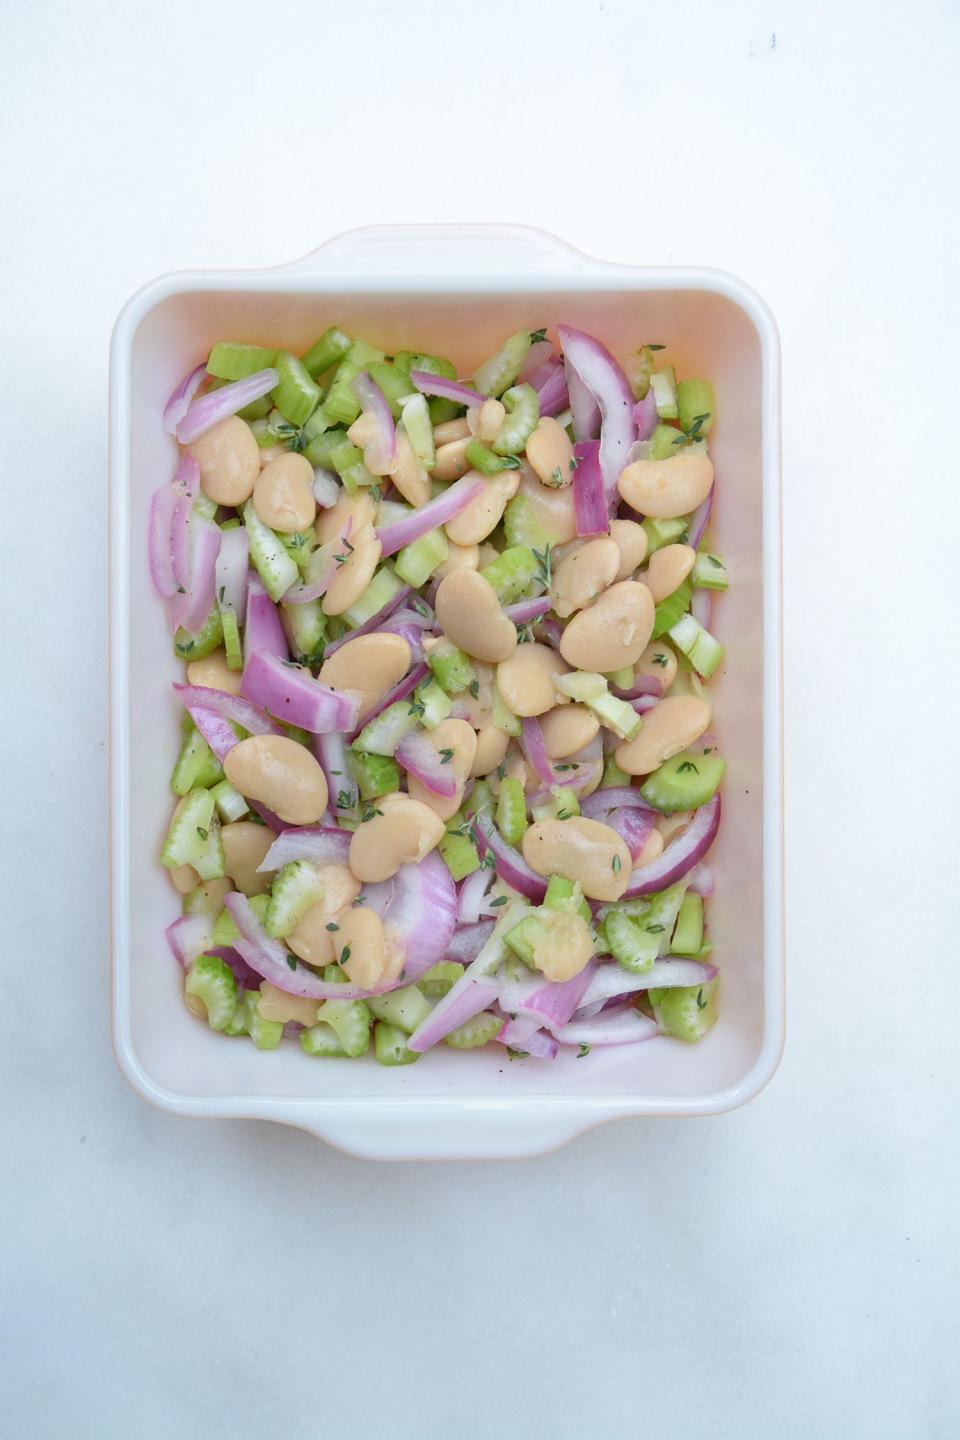 Butter bean, red onion and celery salad is from Olia Hercules'  book “Summer Kitchens: Recipes and Reminiscences from Every Corner of Ukraine.”